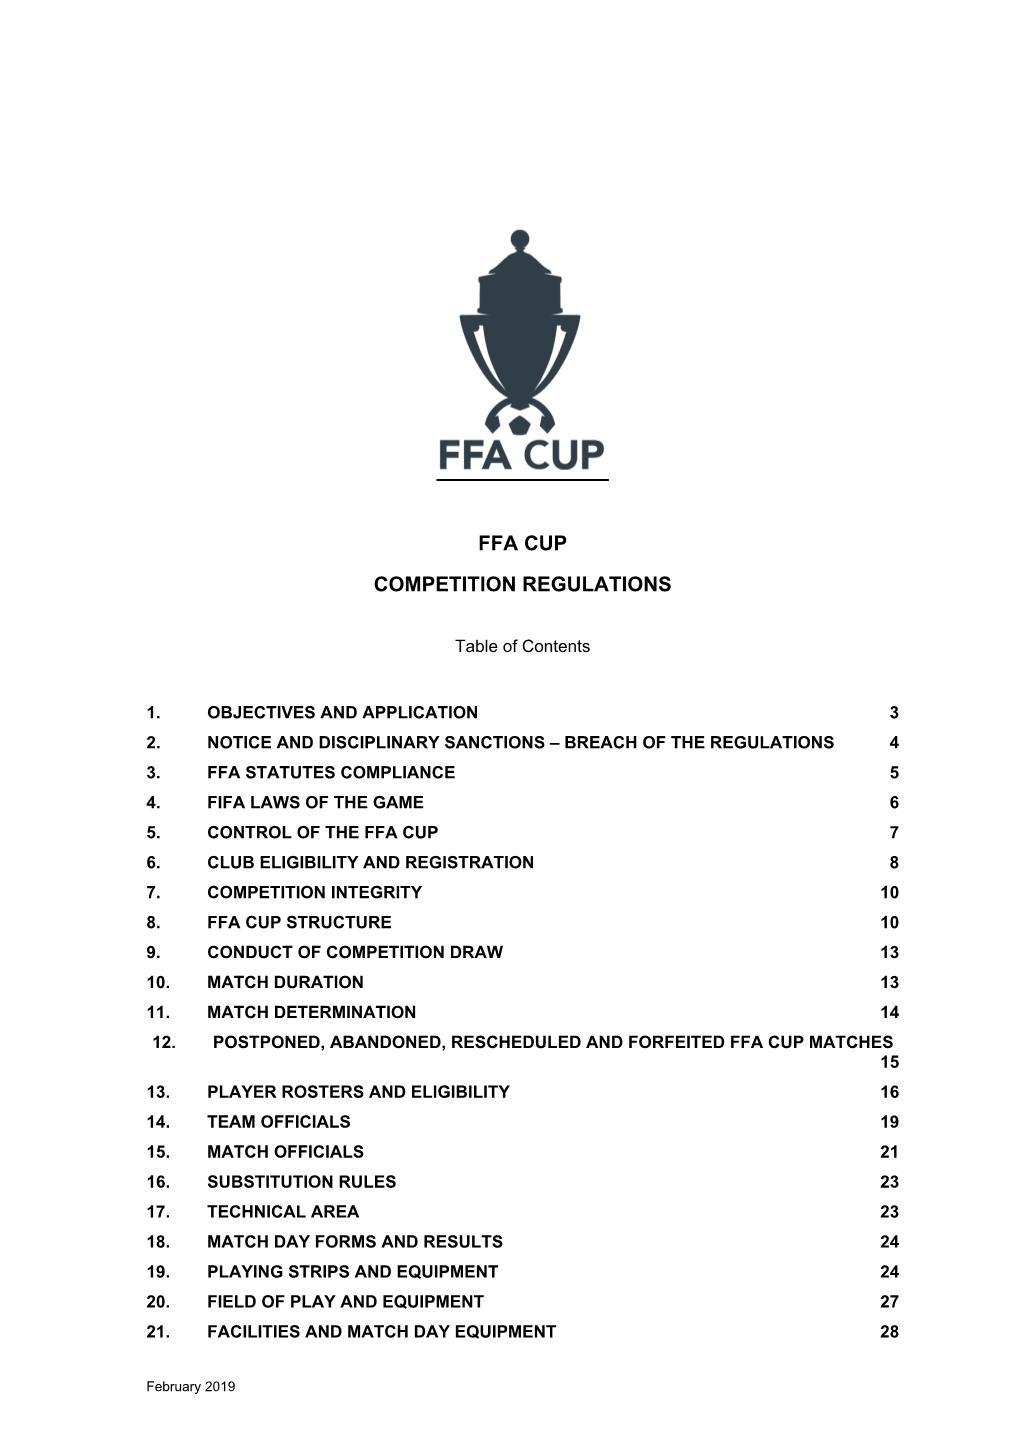 FFA Cup 2019 Competition Regulations